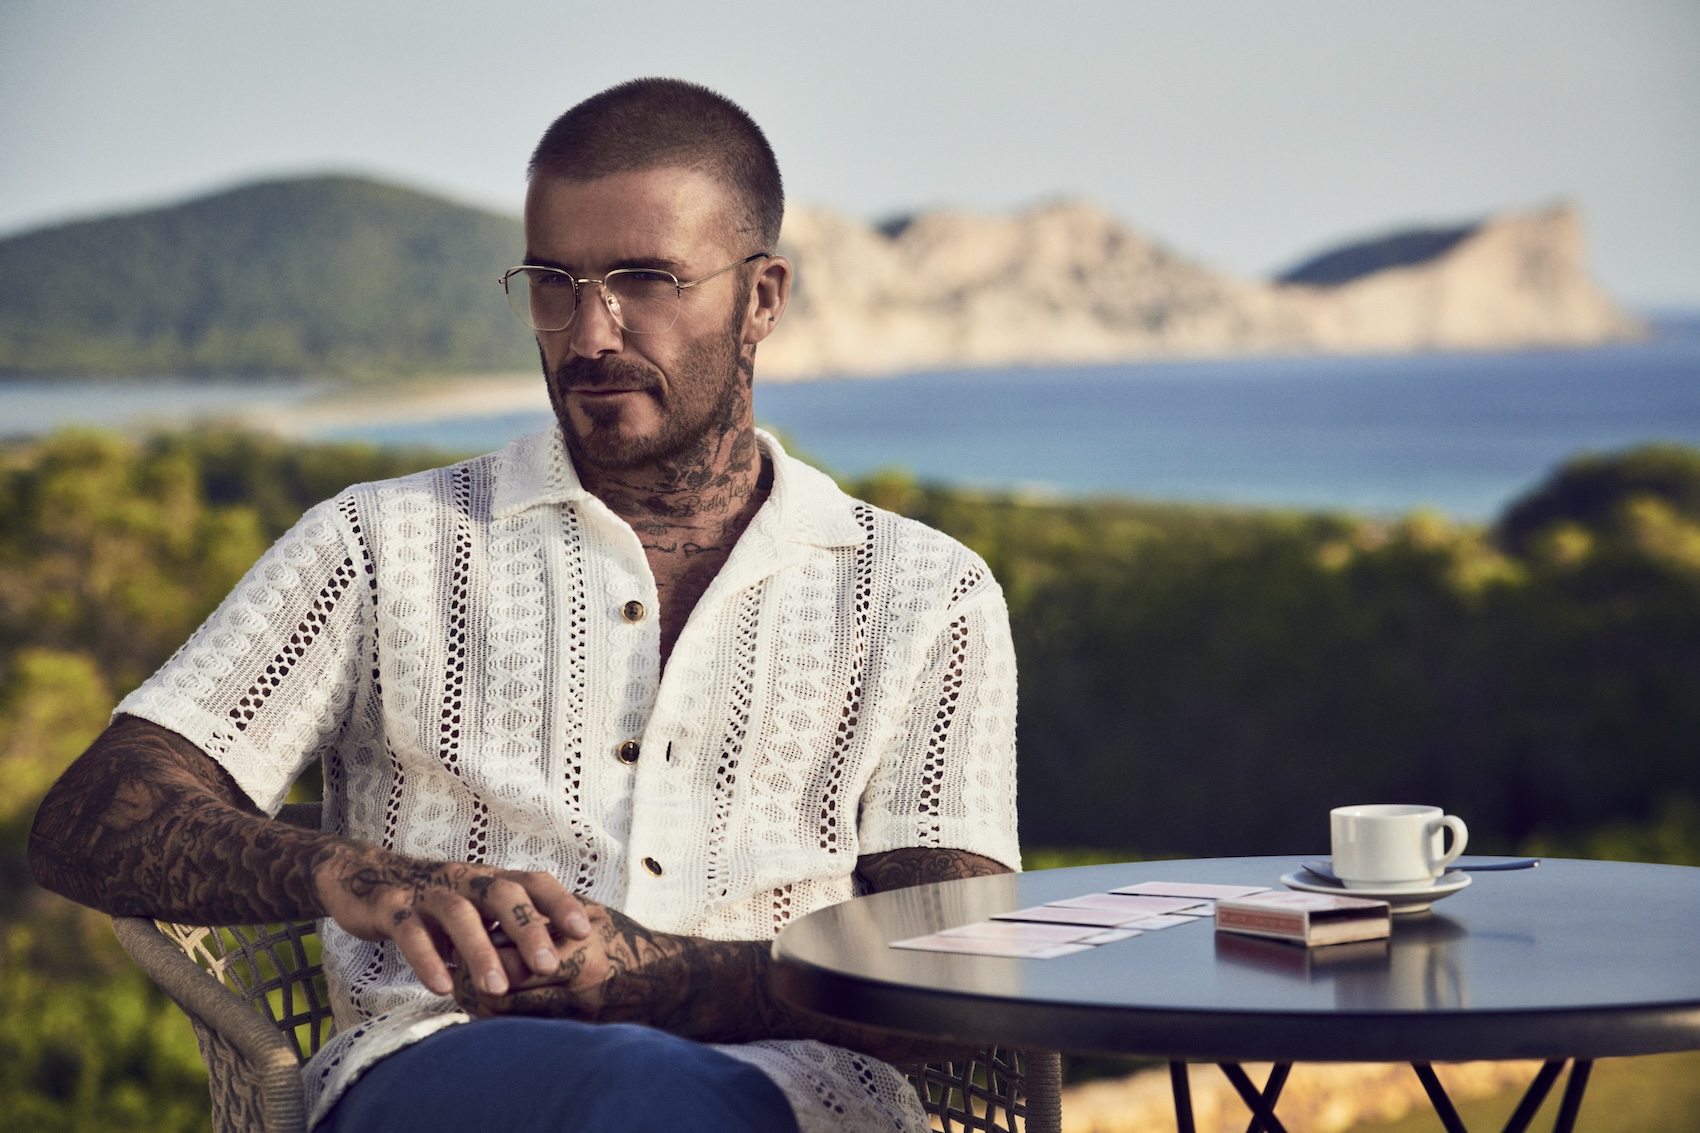 David Beckham shows off his abs in new Spring/Summer eyewear campaign